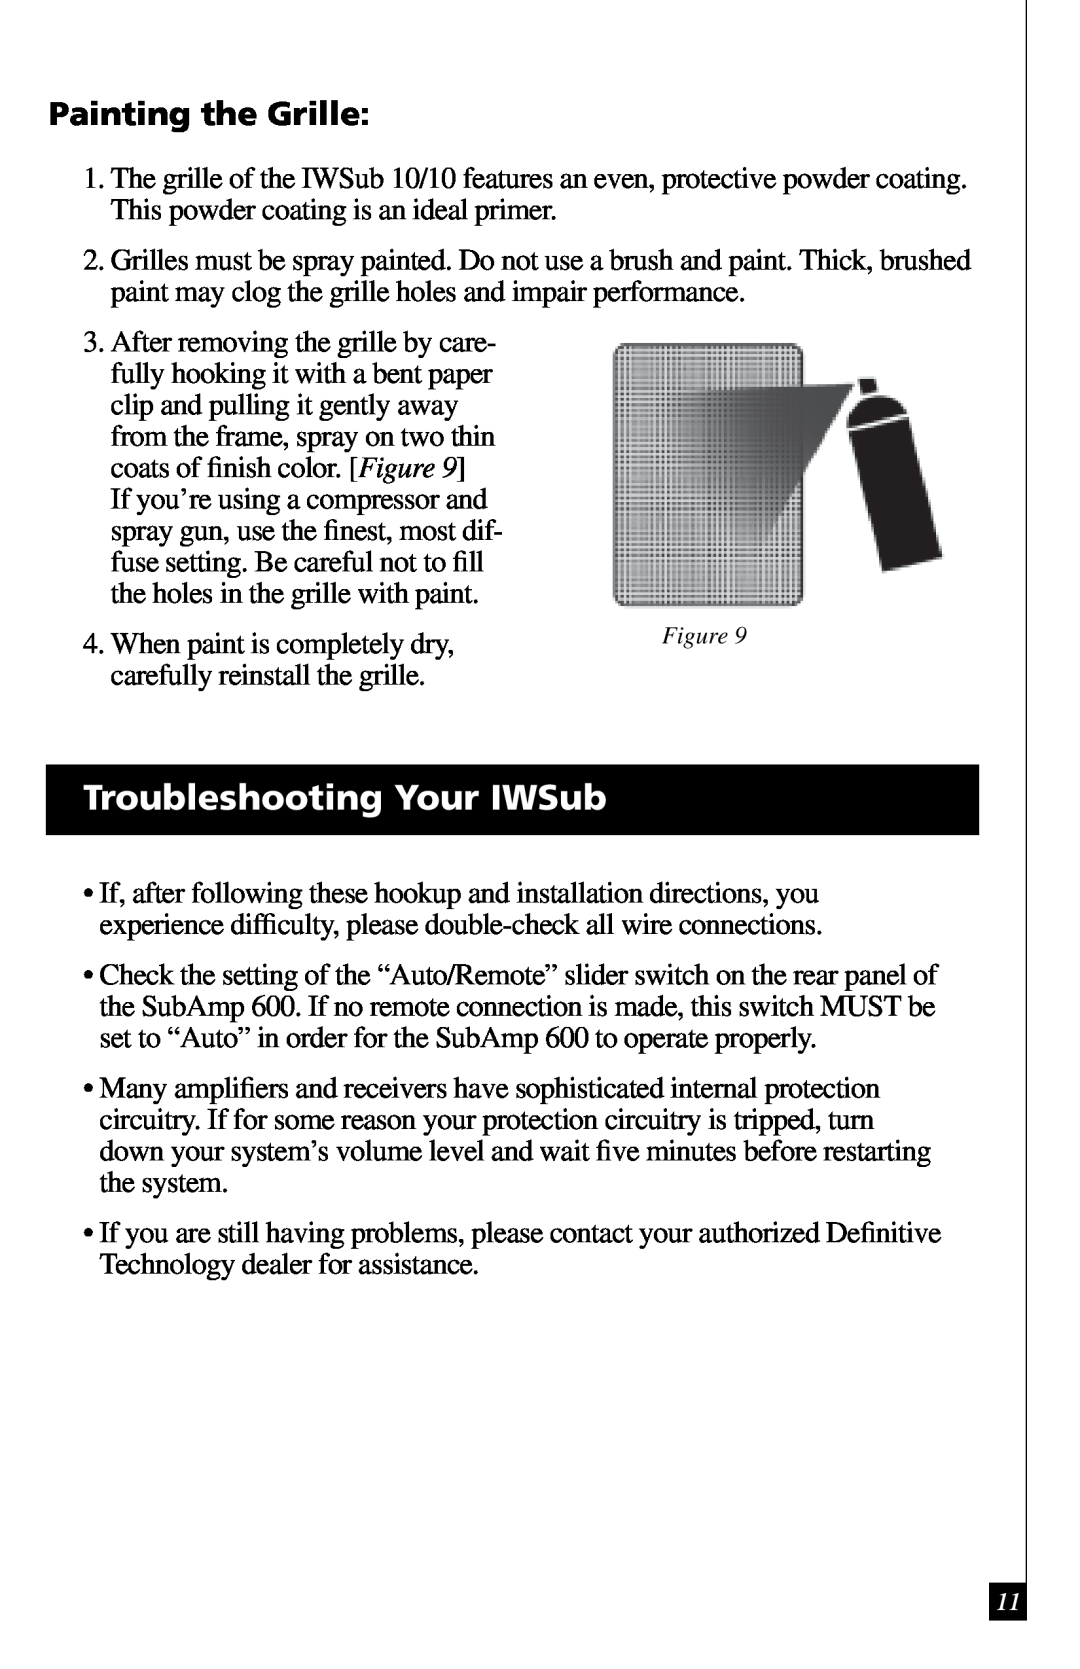 Definitive Technology IWSUB1010 owner manual Troubleshooting Your IWSub, Painting the Grille 